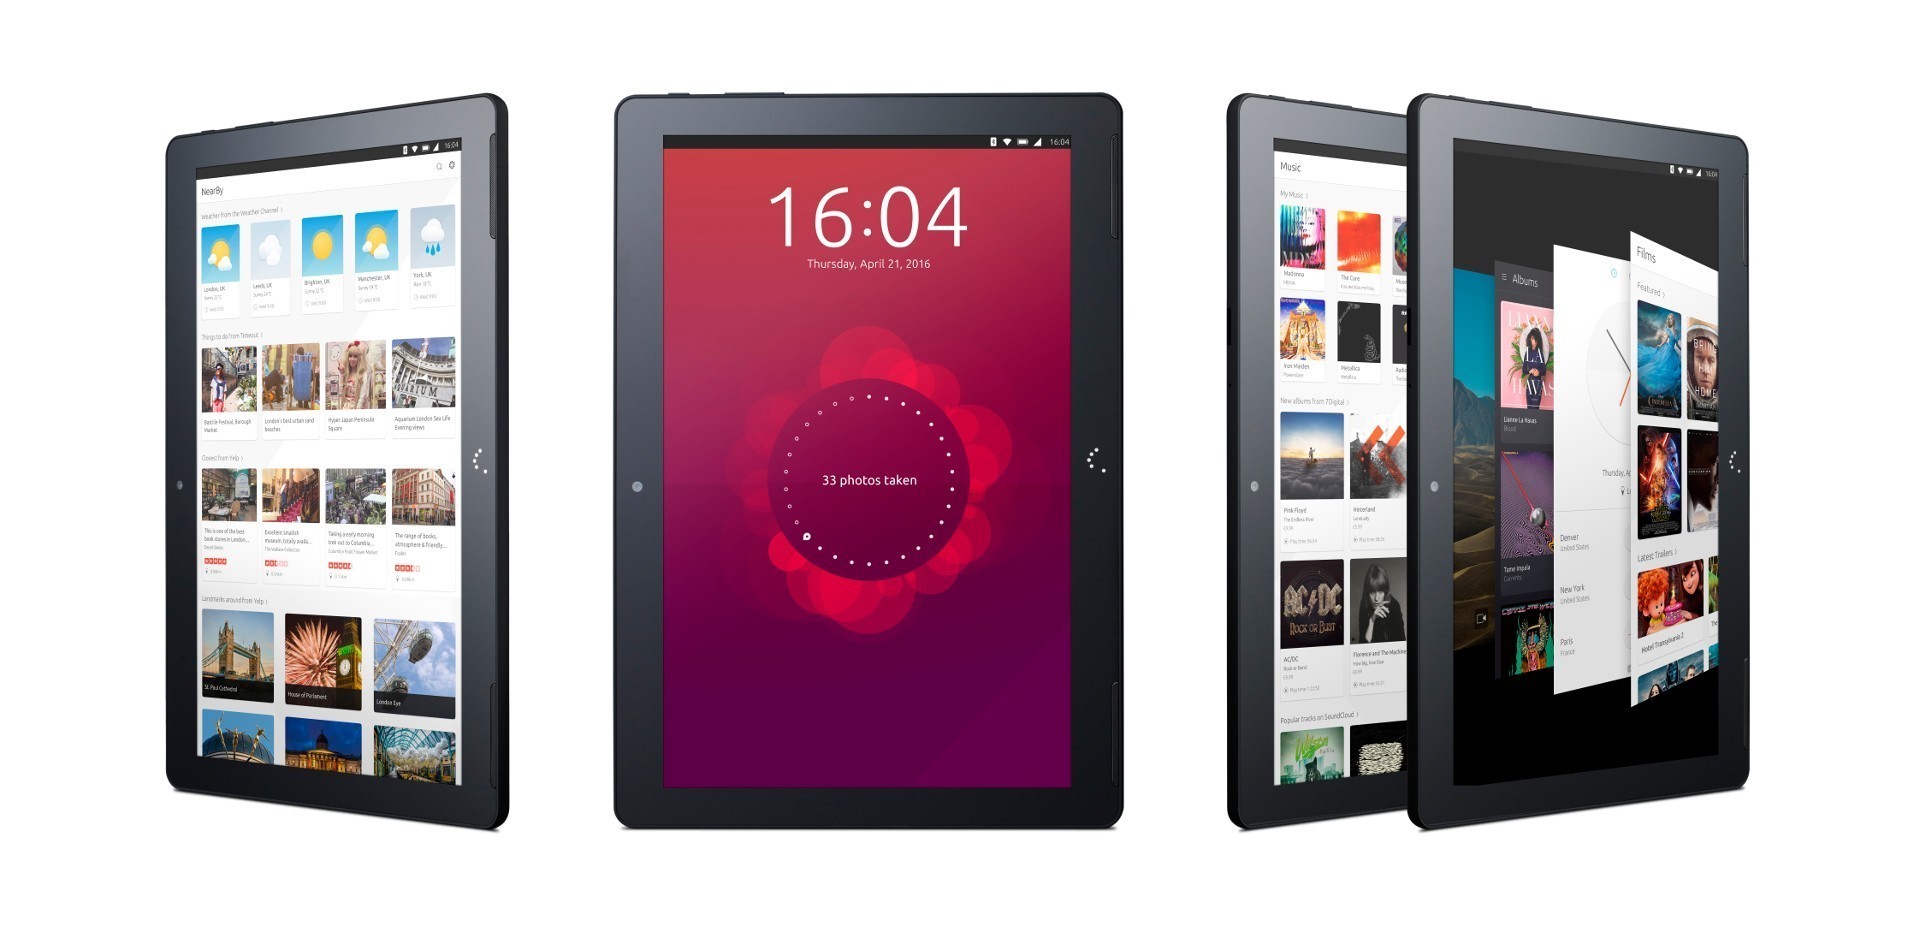 ubuntu-touch-ota-11-launches-today-for-a